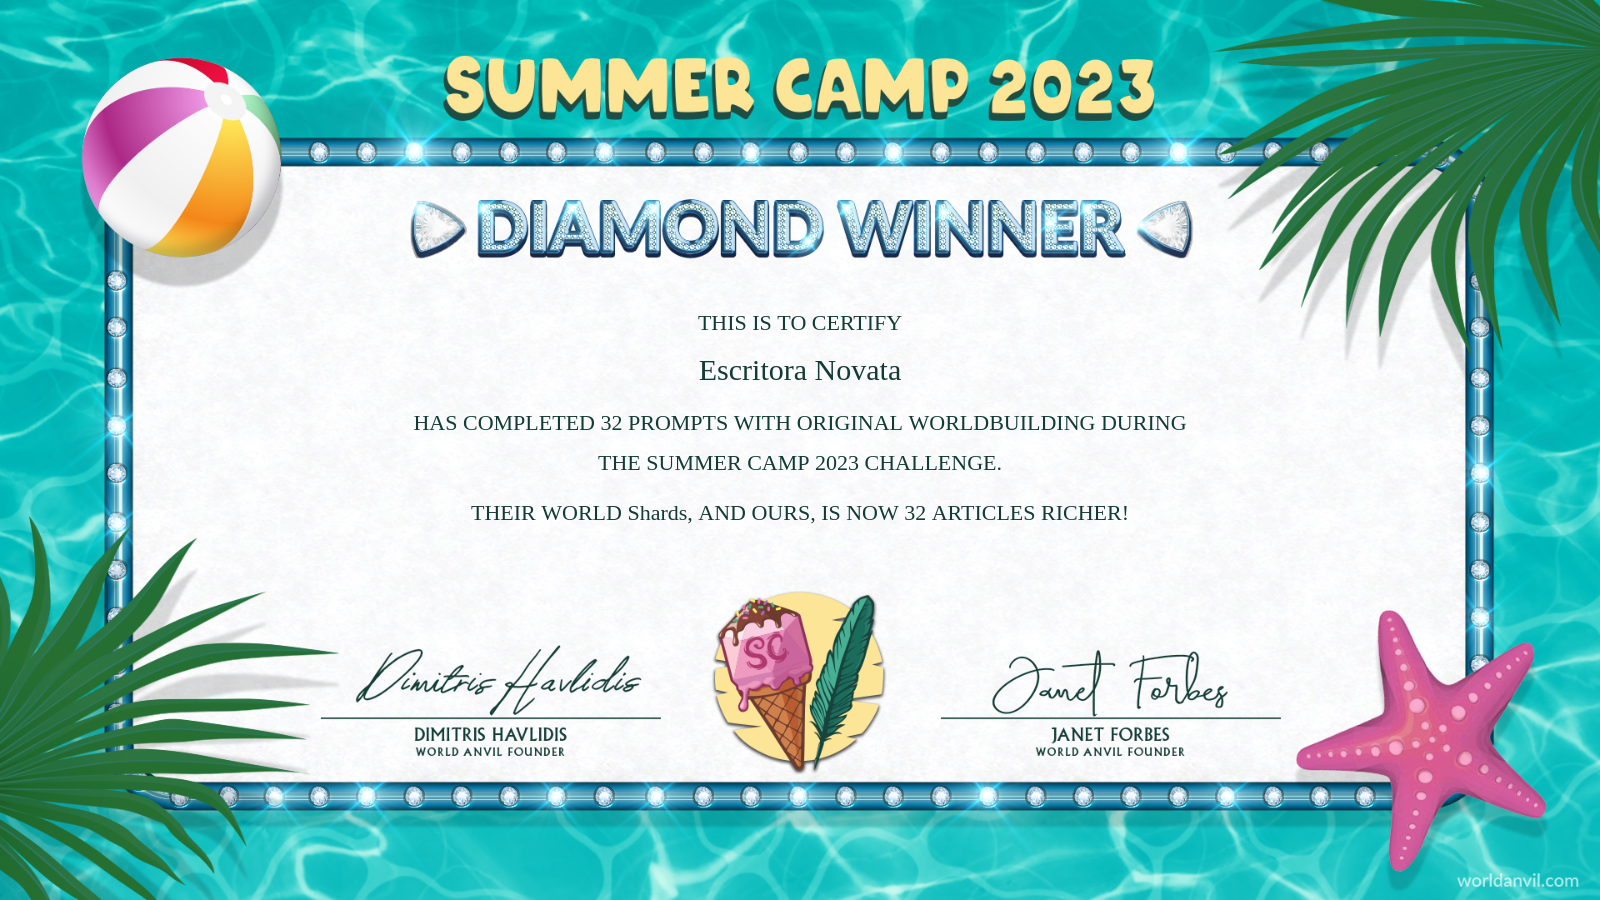 Summer Camp 2023. Diamond winner. Escritora Novata has completed 32 prompts with original worldbuilding in the summer camp 2023 challenge.